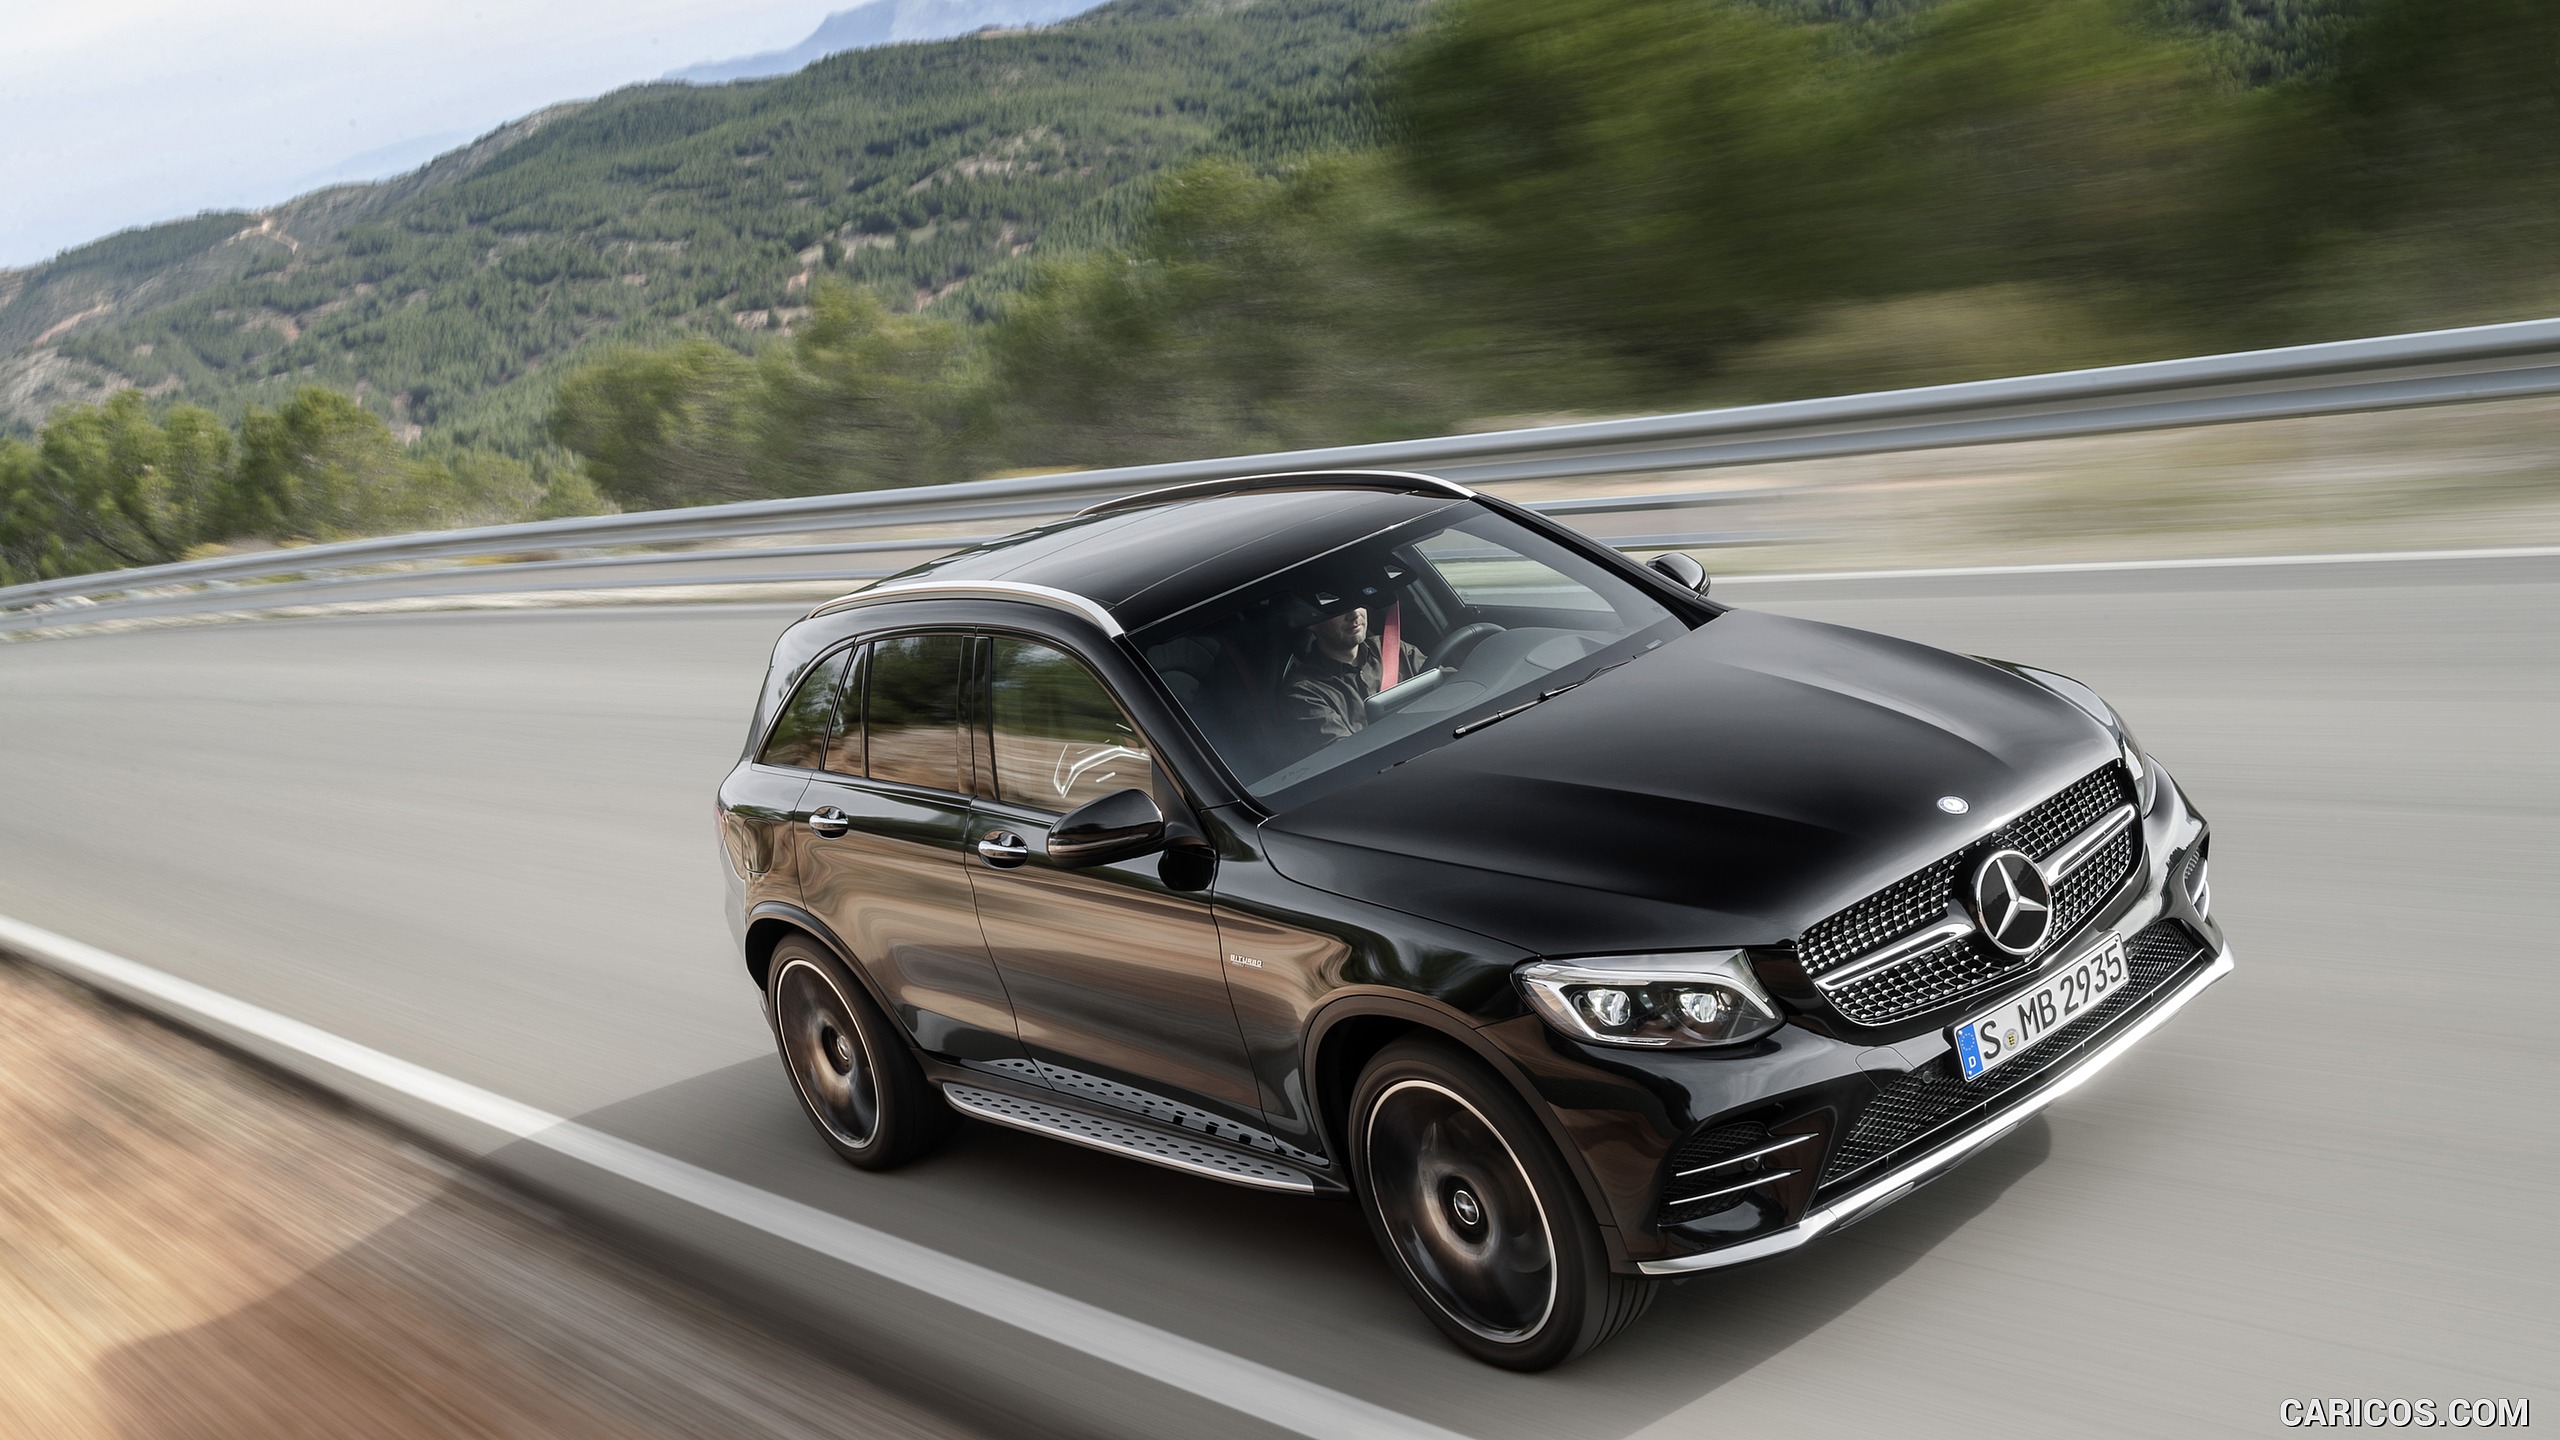 2017 Mercedes-AMG GLC 43 4MATIC (Chassis: X253, Color: Obsidian Black) - Top, #12 of 108